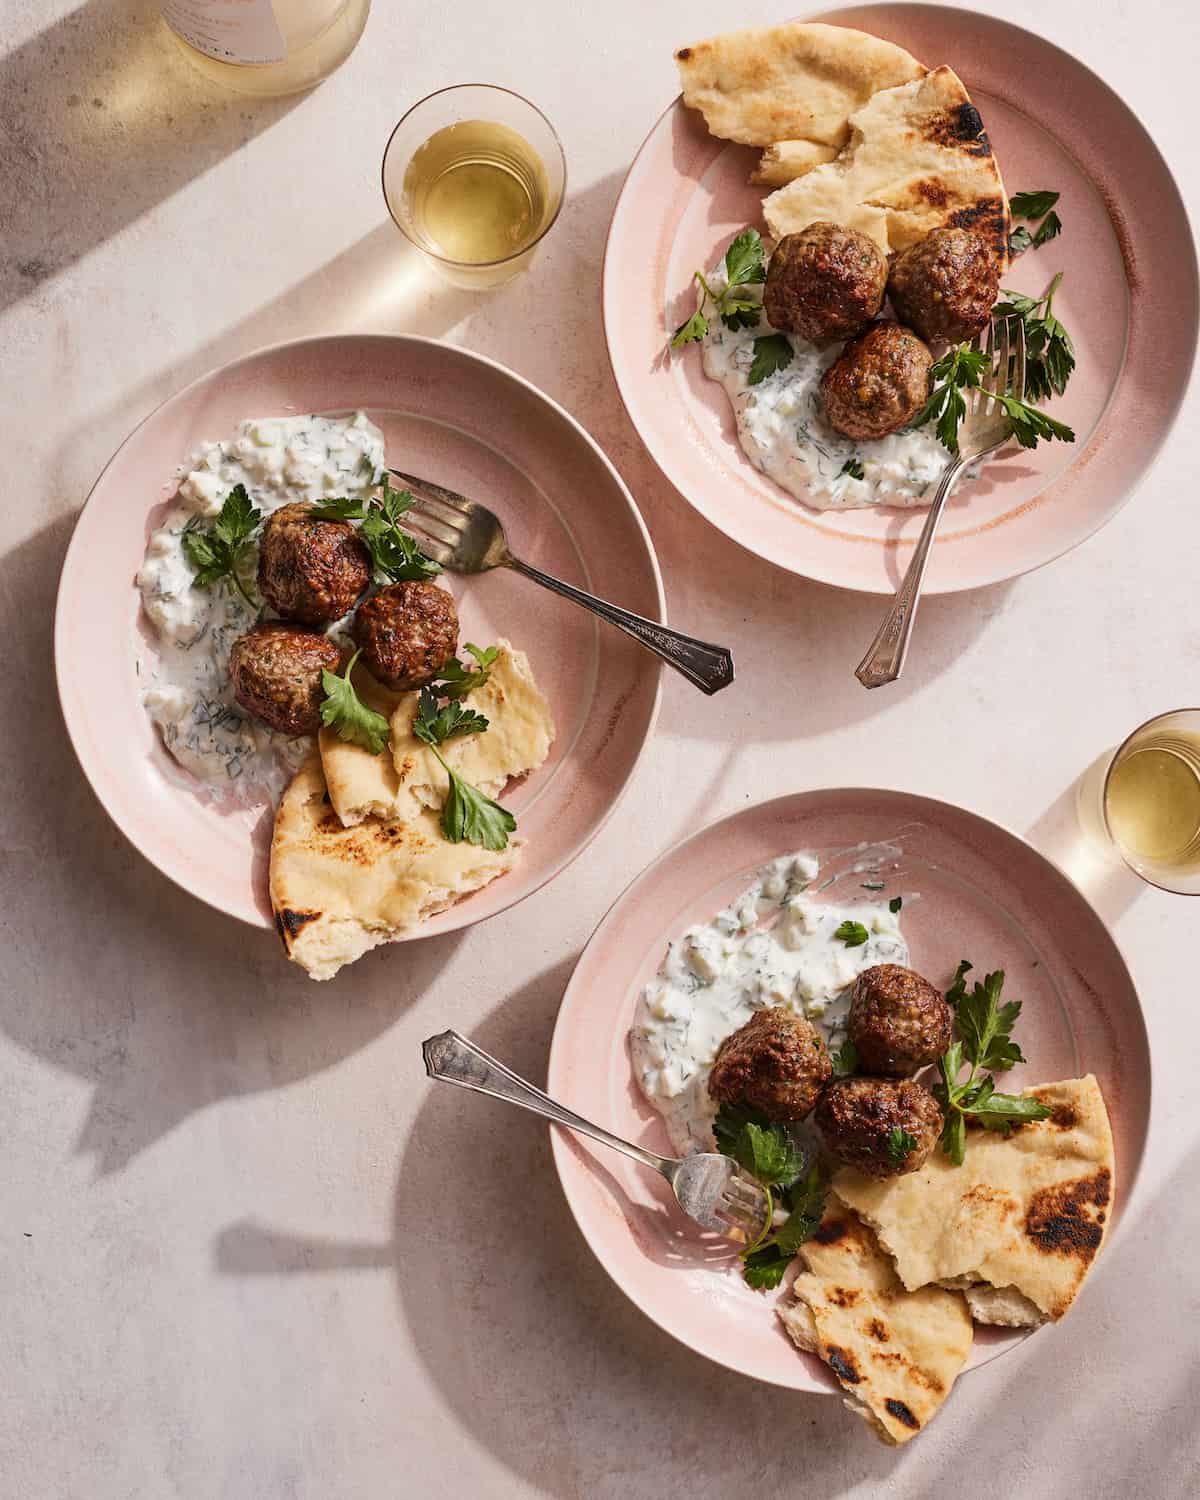 Greek lamb meatballs served in 3 separate pink bowls topped with parsley leaves with a side of naan bread served with two glasses of white wine 